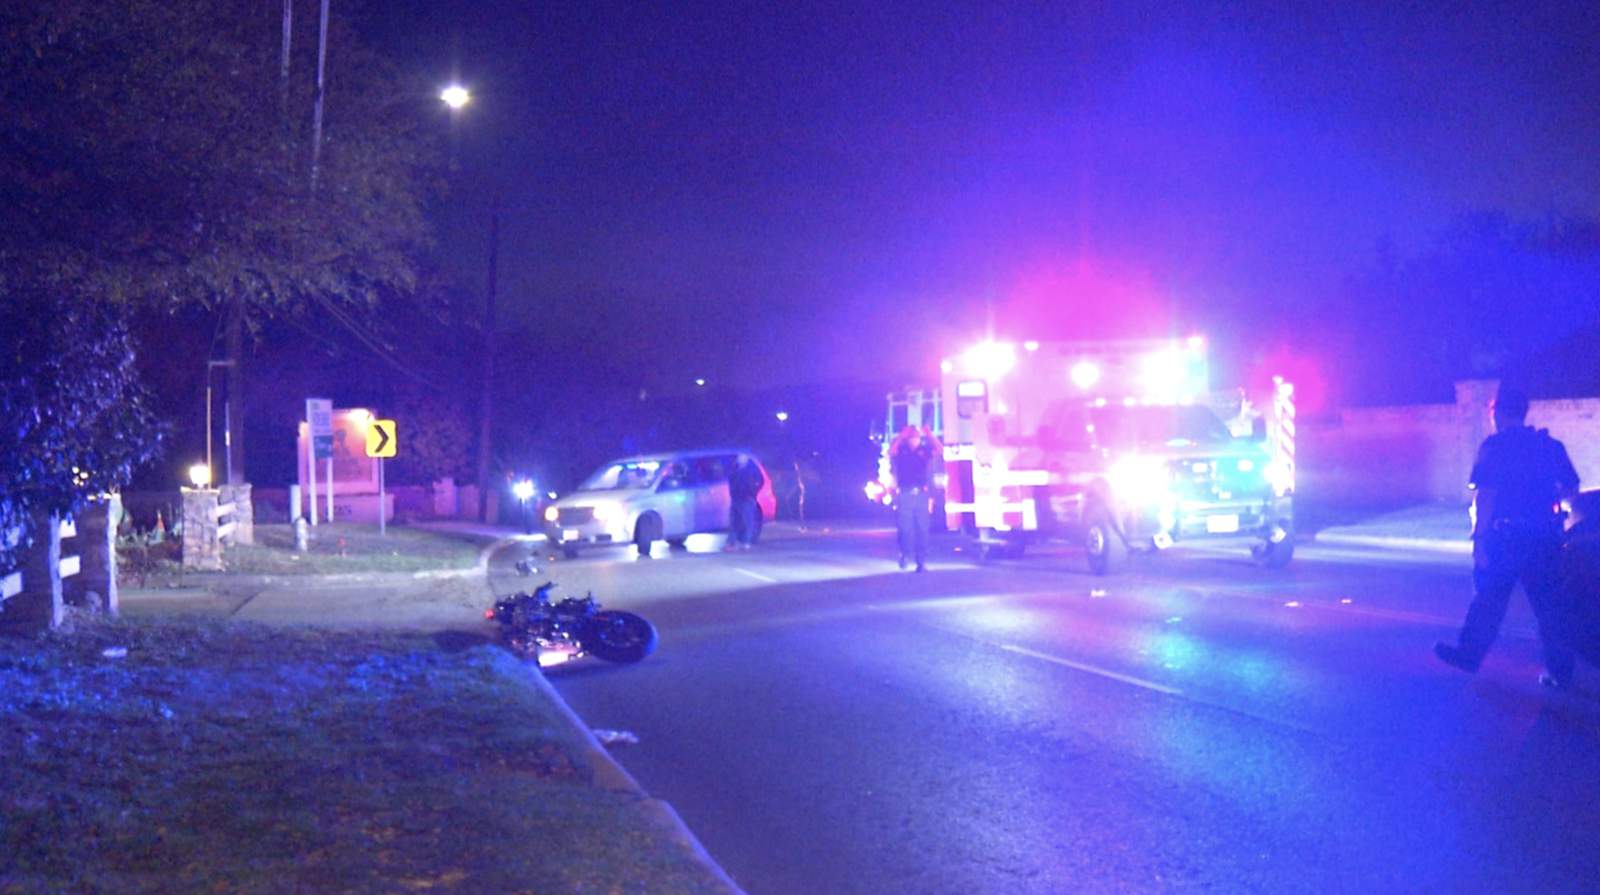 SAPD: Motorcyclist taken to hospital after crashing on North Side road